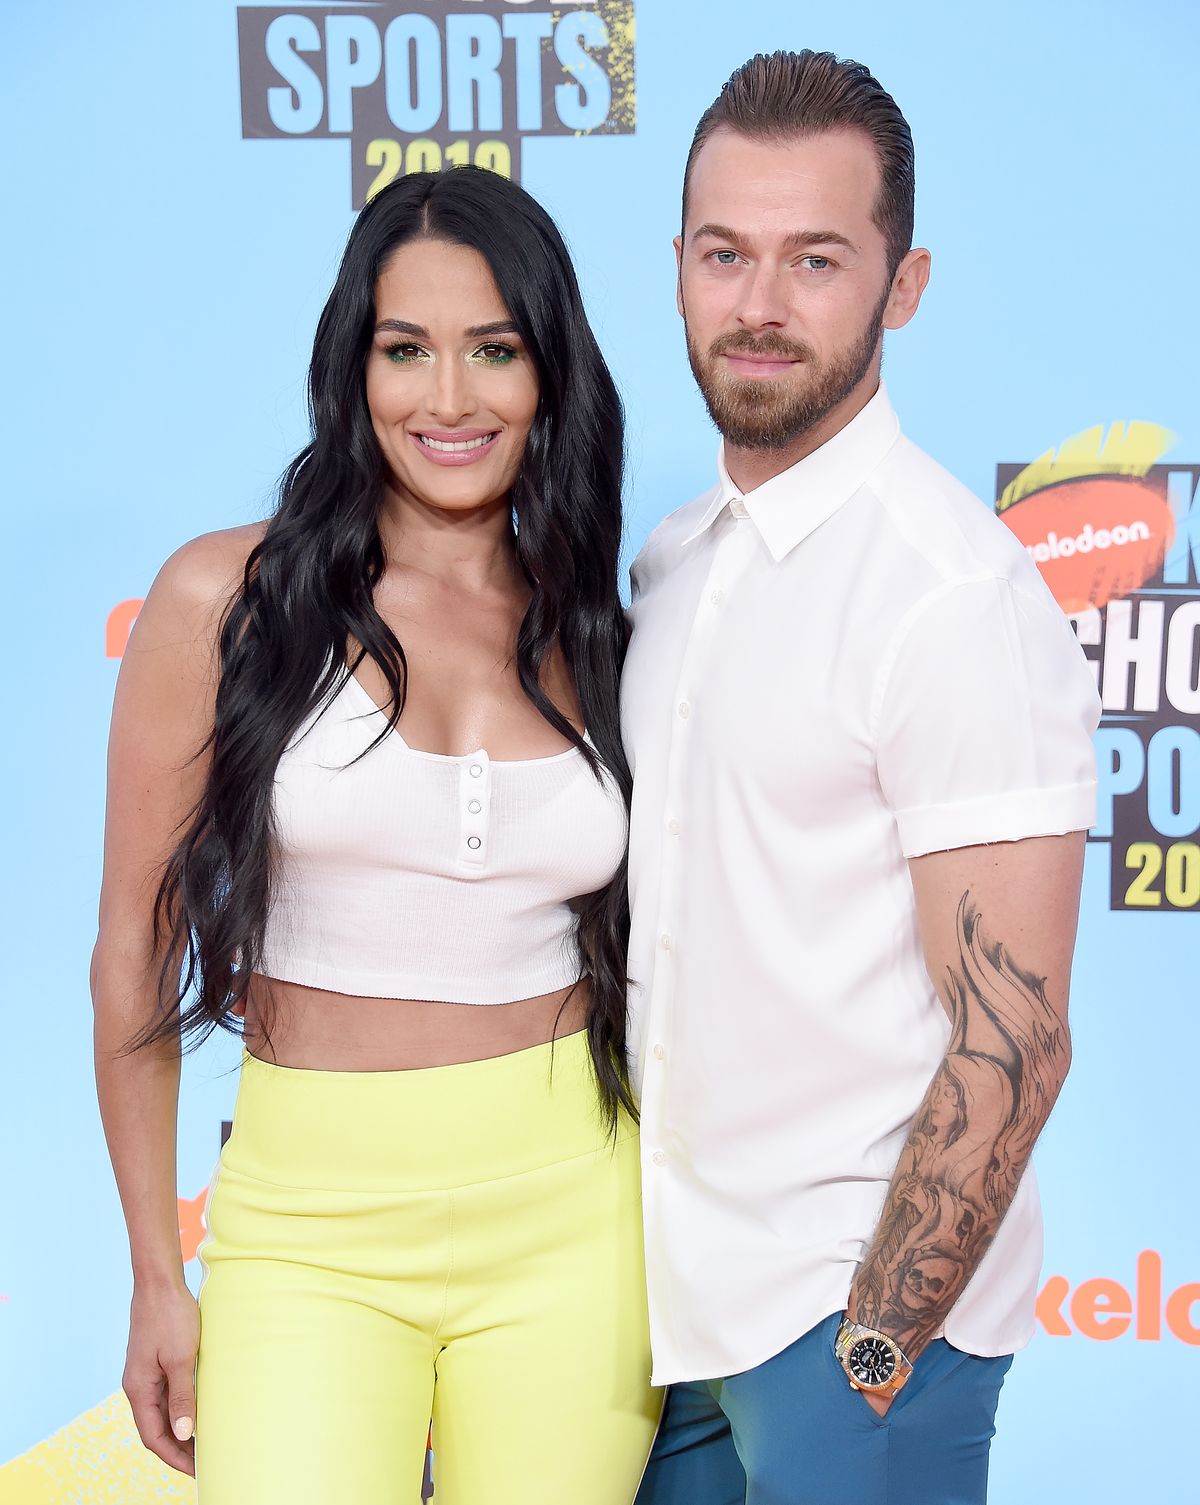 Nikki Bella and Artem Chigvintsev at the Nickelodeon Kids' Choice Sports event on July 11, 2019, in Santa Monica, California | Photo: Gregg DeGuire/WireImage/Getty Images